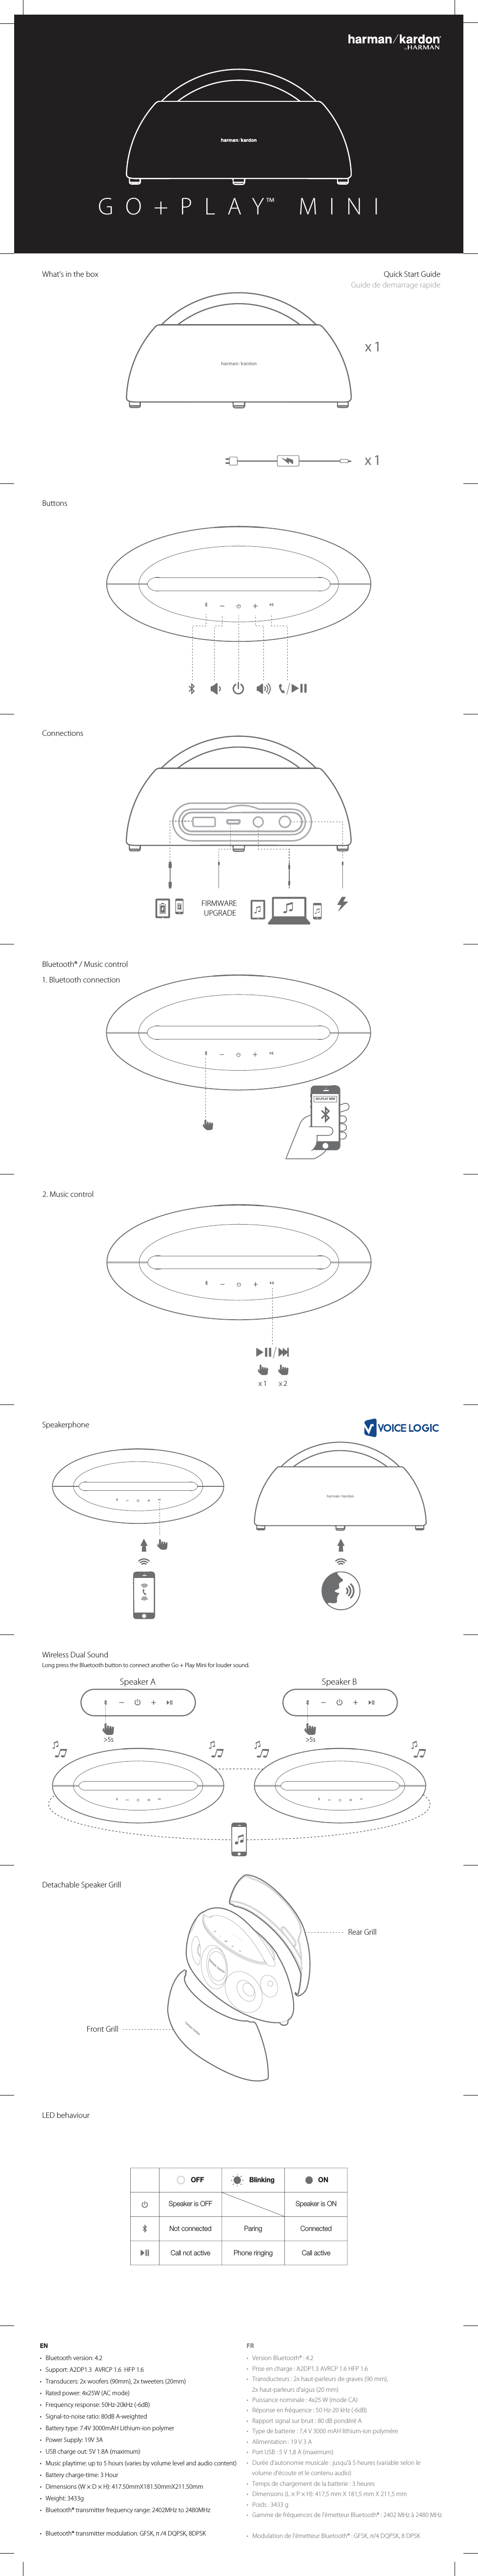 EN FRQuick Start GuideGuide de demarrage rapideButtonsBluetooth® / Music control1. Bluetooth connectionWhat’s in the boxDetachable Speaker GrillLED behaviourx1SpeakerphoneConnectionsWireless Dual Soundx1Rear GrillFront GrillGO+PLAY™MINIGO+PLAY MINI• Bluetooth version: 4.2• Support: A2DP1.3 AVRCP 1.6 HFP 1.6• Transducers: 2x woofers (90mm), 2x tweeters (20mm)• Rated power: 4x25W (AC mode)• Frequency response: 50Hz-20kHz (-6dB)• Signal-to-noise ratio: 80dB A-weighted• Battery type: 7.4V 3000mAH Lithium-ion polymer• Power Supply: 19V 3A• USB charge out: 5V 1.8A (maximum)• Music playtime: up to 5 hours (varies by volume level and audio content)• Battery charge-time: 3 Hour• Dimensions (W × D × H): 417.50mmX181.50mmX211.50mm• Weight: 3433g• Bluetooth® transmitter frequency range: 2402MHz to 2480MHz• Bluetooth® transmitter power: 0 to 9dBm• Bluetooth® transmitter modulation: GFSK, π /4 DQPSK, 8DPSK• Version Bluetooth® : 4.2• Prise en charge : A2DP1.3 AVRCP 1.6 HFP 1.6• Transducteurs : 2x haut-parleurs de graves (90 mm),2x haut-parleurs d&apos;aigus (20 mm)• Puissance nominale : 4x25 W (mode CA)• Réponse en fréquence : 50 Hz-20 kHz (-6dB)• Rapport signal sur bruit : 80 dB pondéré A• Type de batterie : 7,4 V 3000 mAH lithium-ion polymère• Alimentation : 19 V 3 A• Port USB : 5 V 1,8 A (maximum)• Durée d&apos;autonomie musicale : jusqu&apos;à 5 heures (variable selon levolume d&apos;écoute et le contenu audio)• Temps de chargement de la batterie : 3 heures• Dimensions (L × P × H): 417,5 mm X 181,5 mm X 211,5 mm• Poids : 3433 g• Gamme de fréquences de l’émetteur Bluetooth® : 2402 MHz à 2480 MHz• Puissance de l&apos;émetteur Bluetooth® : 0à9dBm• Modulation de l&apos;émetteur Bluetooth® : GFSK, π/4 DQPSK, 8 DPSKLong press the Bluetooth button to connect another Go + Play Mini for louder sound.FIRMWAREUPGRADEx1 x22. Music control&gt;5sSpeaker A&gt;5sSpeaker BSpeaker is ONSpeaker is OFFConnectedCall activeParingPhone ringingNot connectedCall not active)SPURPUN 656--